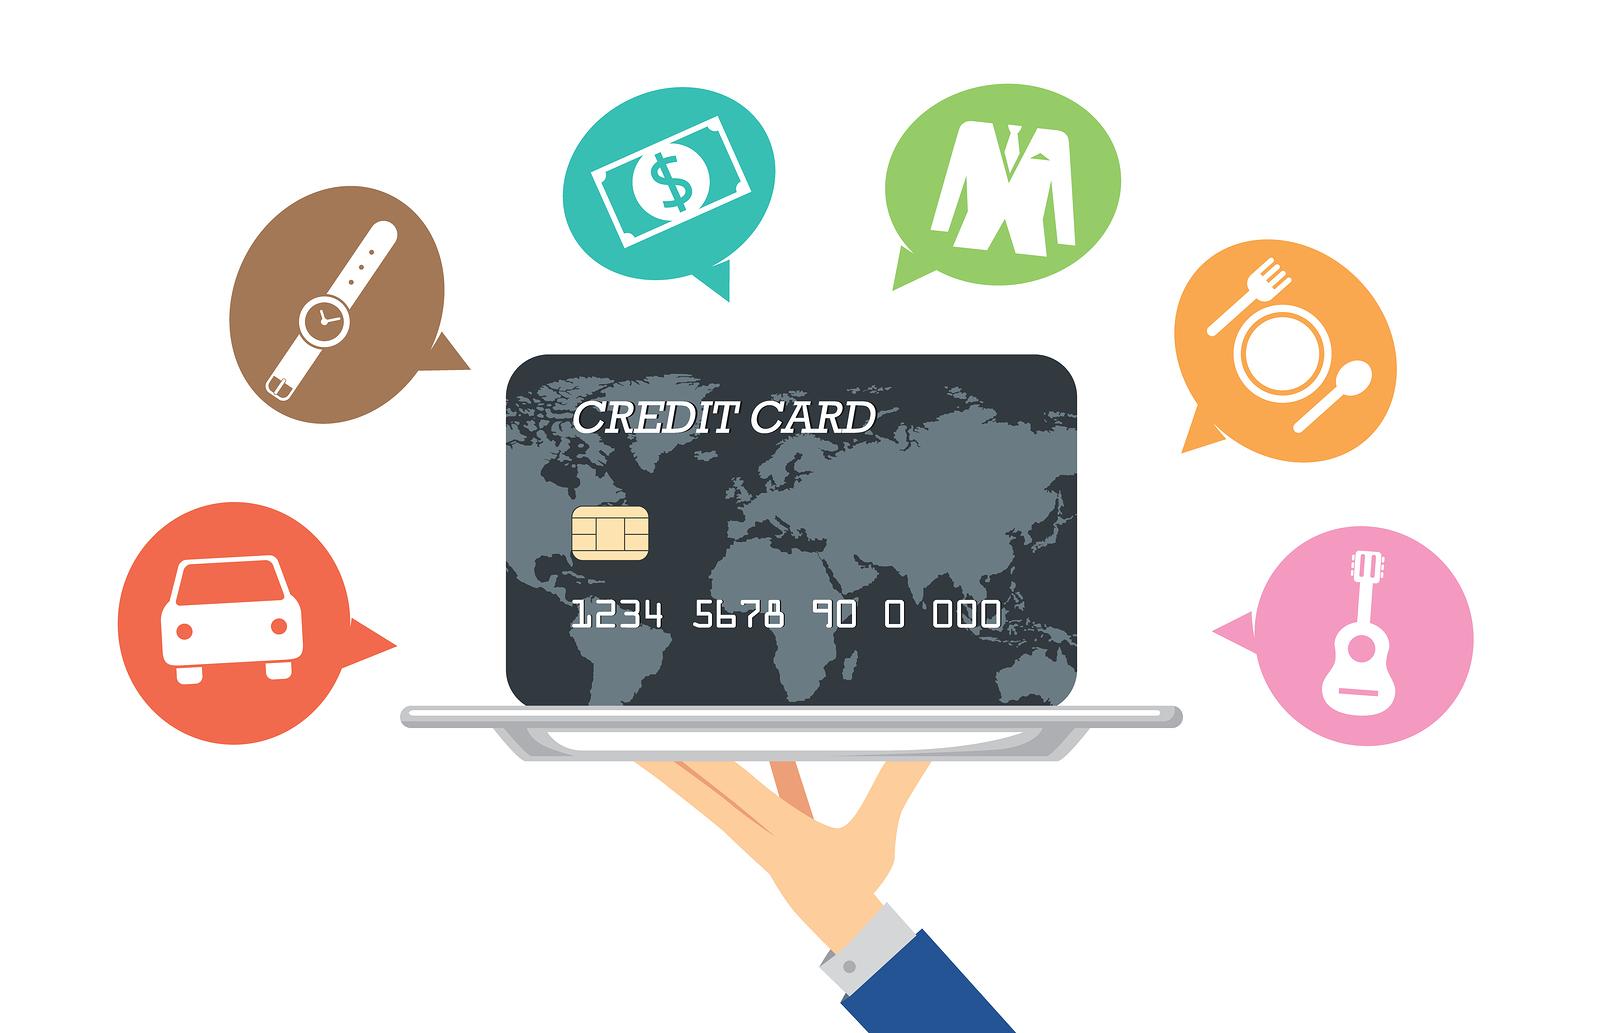 5 Small But Important Things To Observe In ACH And Credit Cards – A Single Integration